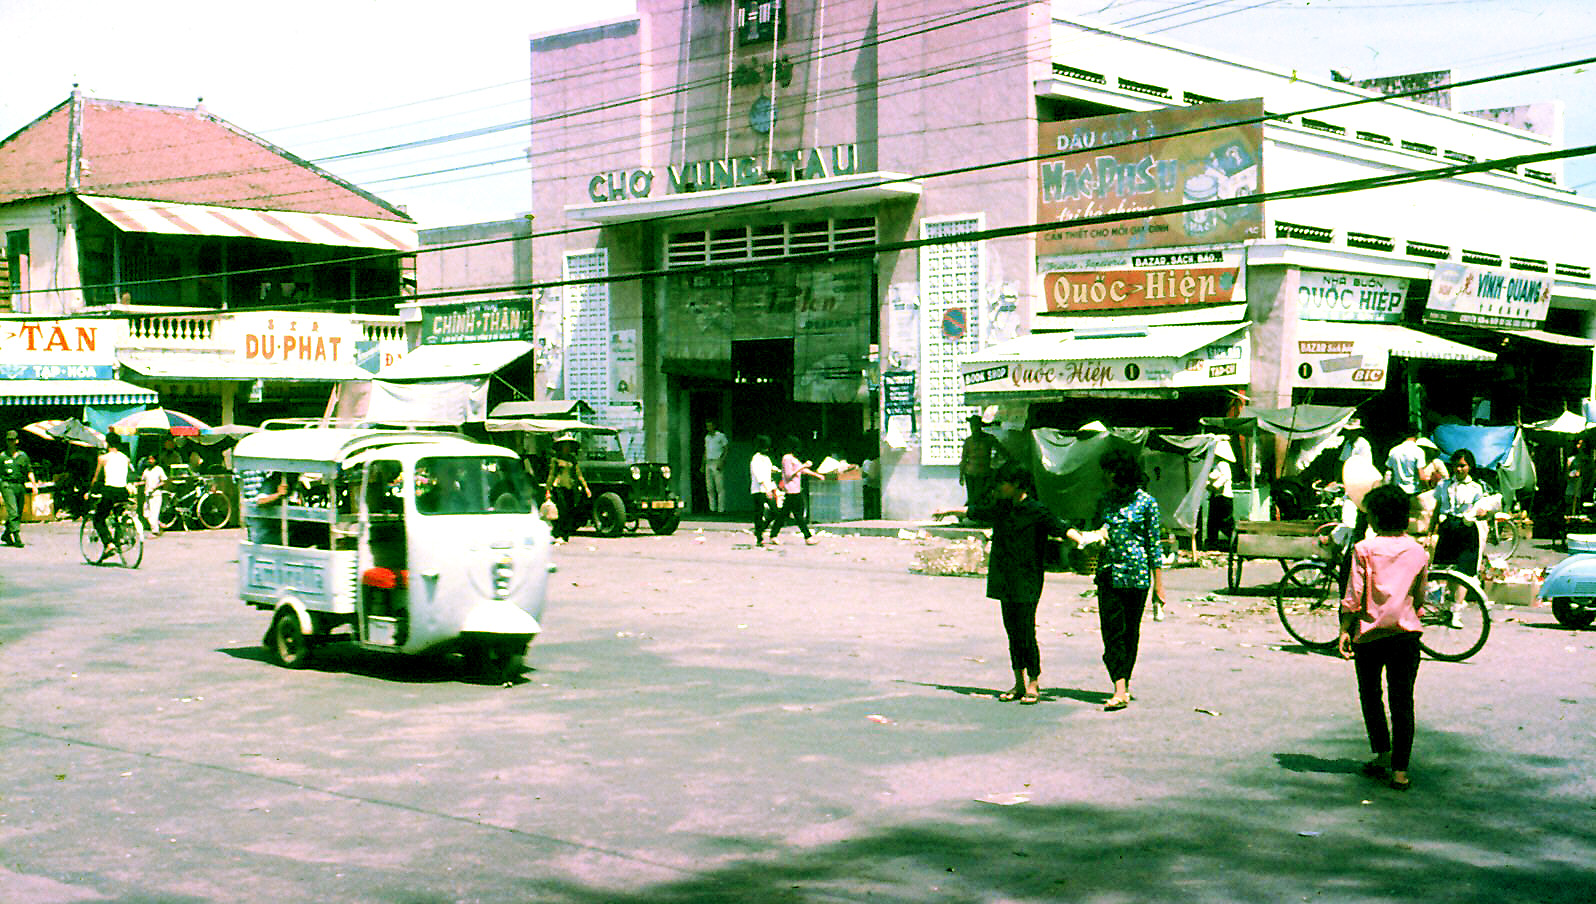 a street scene with an old bus and people